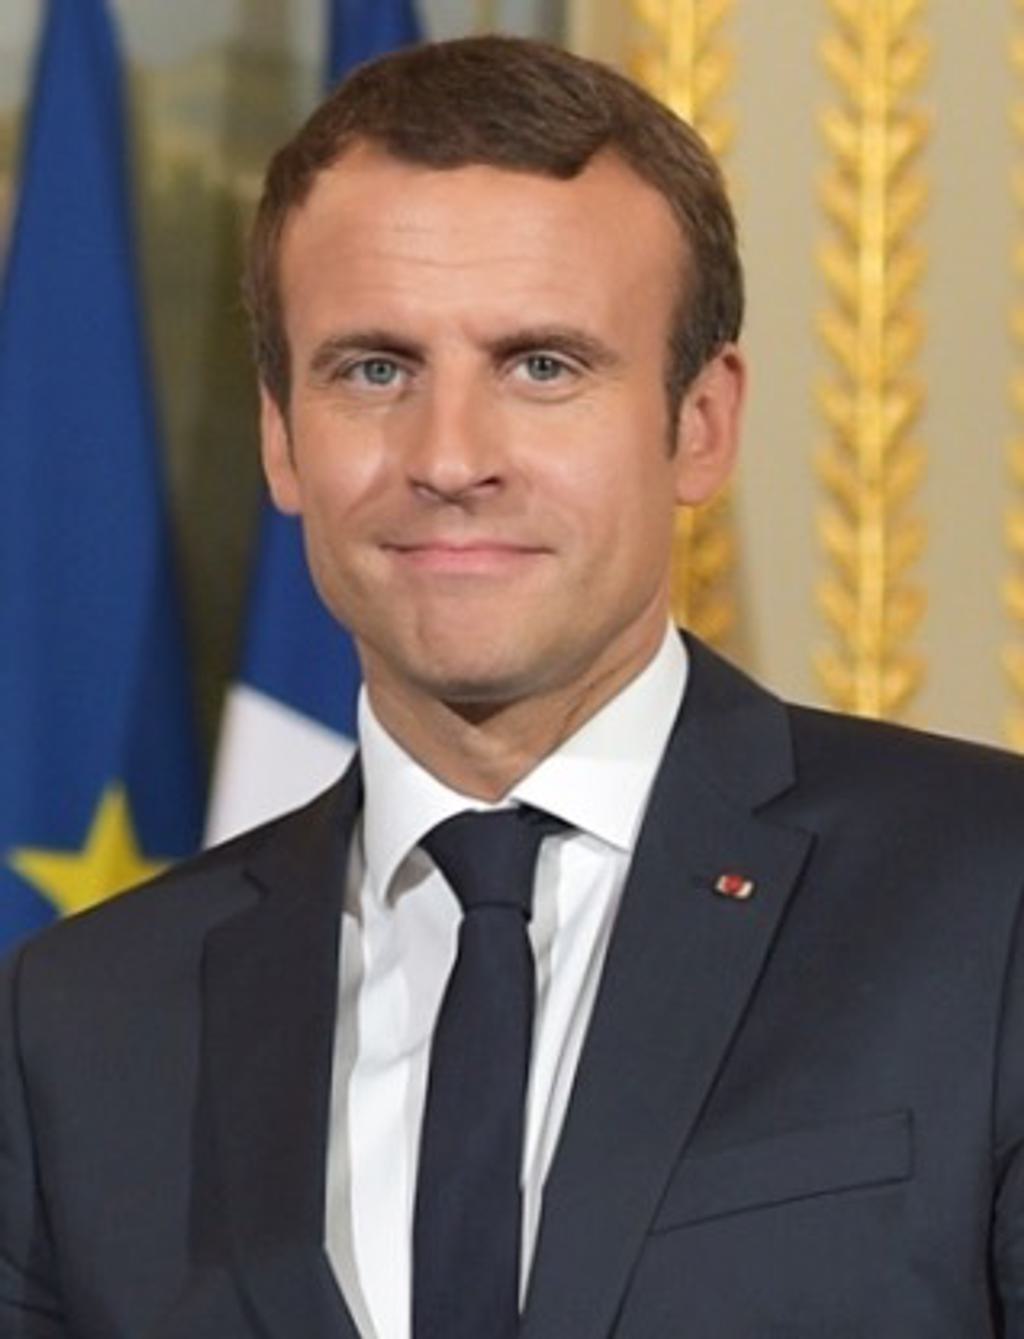 As France Prepares to Assume Presidency of European Union, Emmanuel Macron Announces Initiative for Worldwide Abolition of Death Penalty